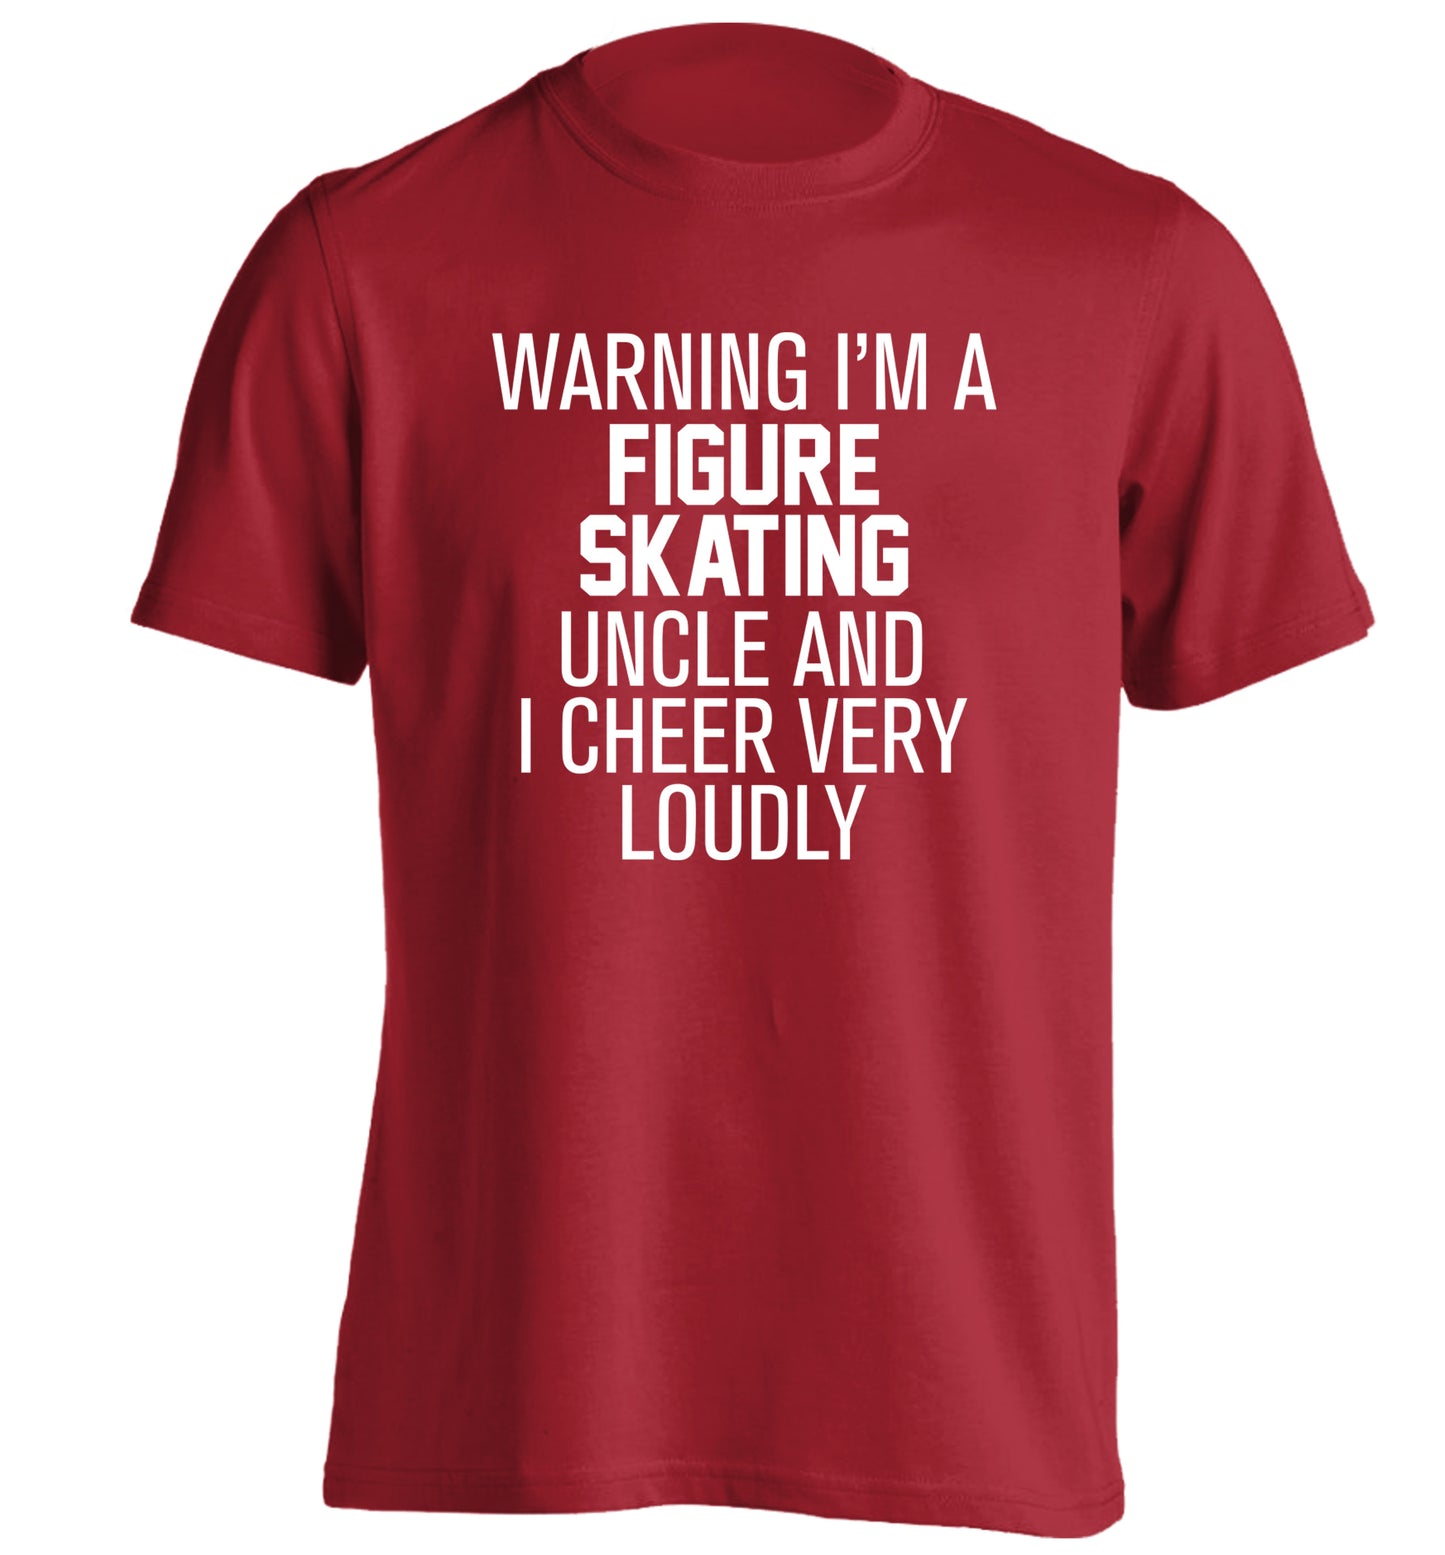 Warning I'm a figure skating uncle and I cheer very loudly adults unisexred Tshirt 2XL